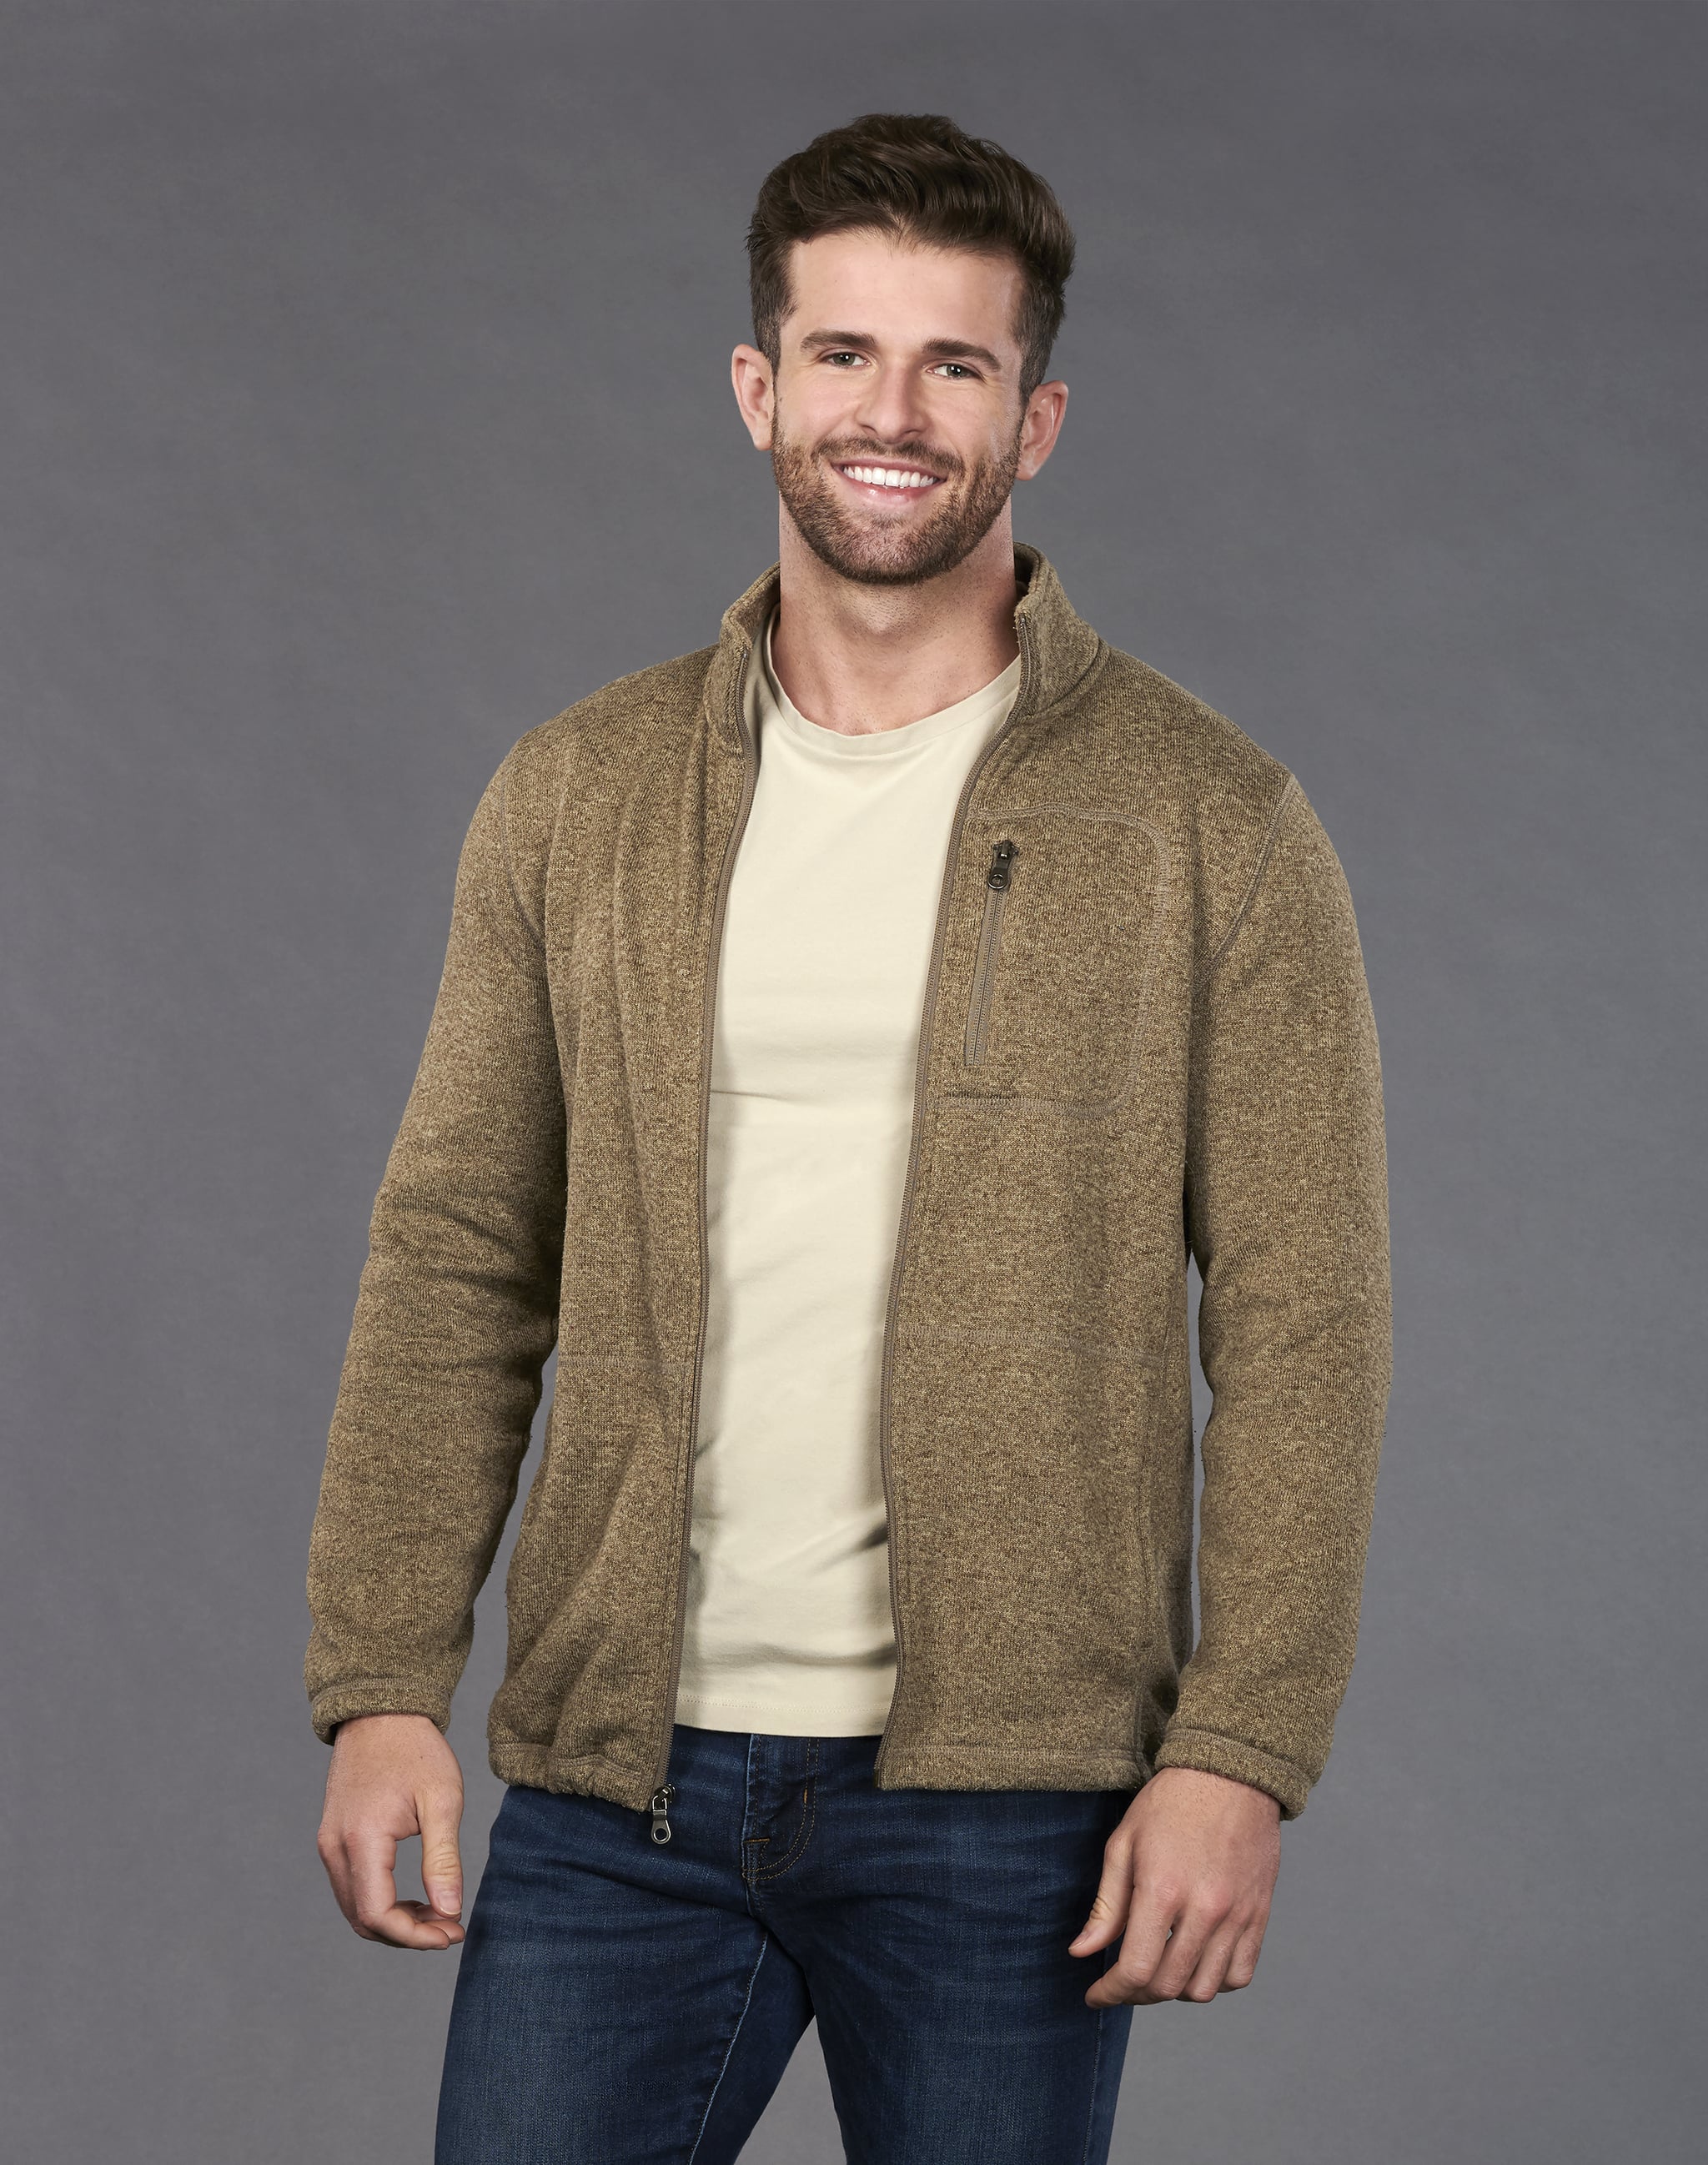 THE BACHELORETTE - Hannah Brown caught the eye of Colton Underwood early on during the 23rd season of 